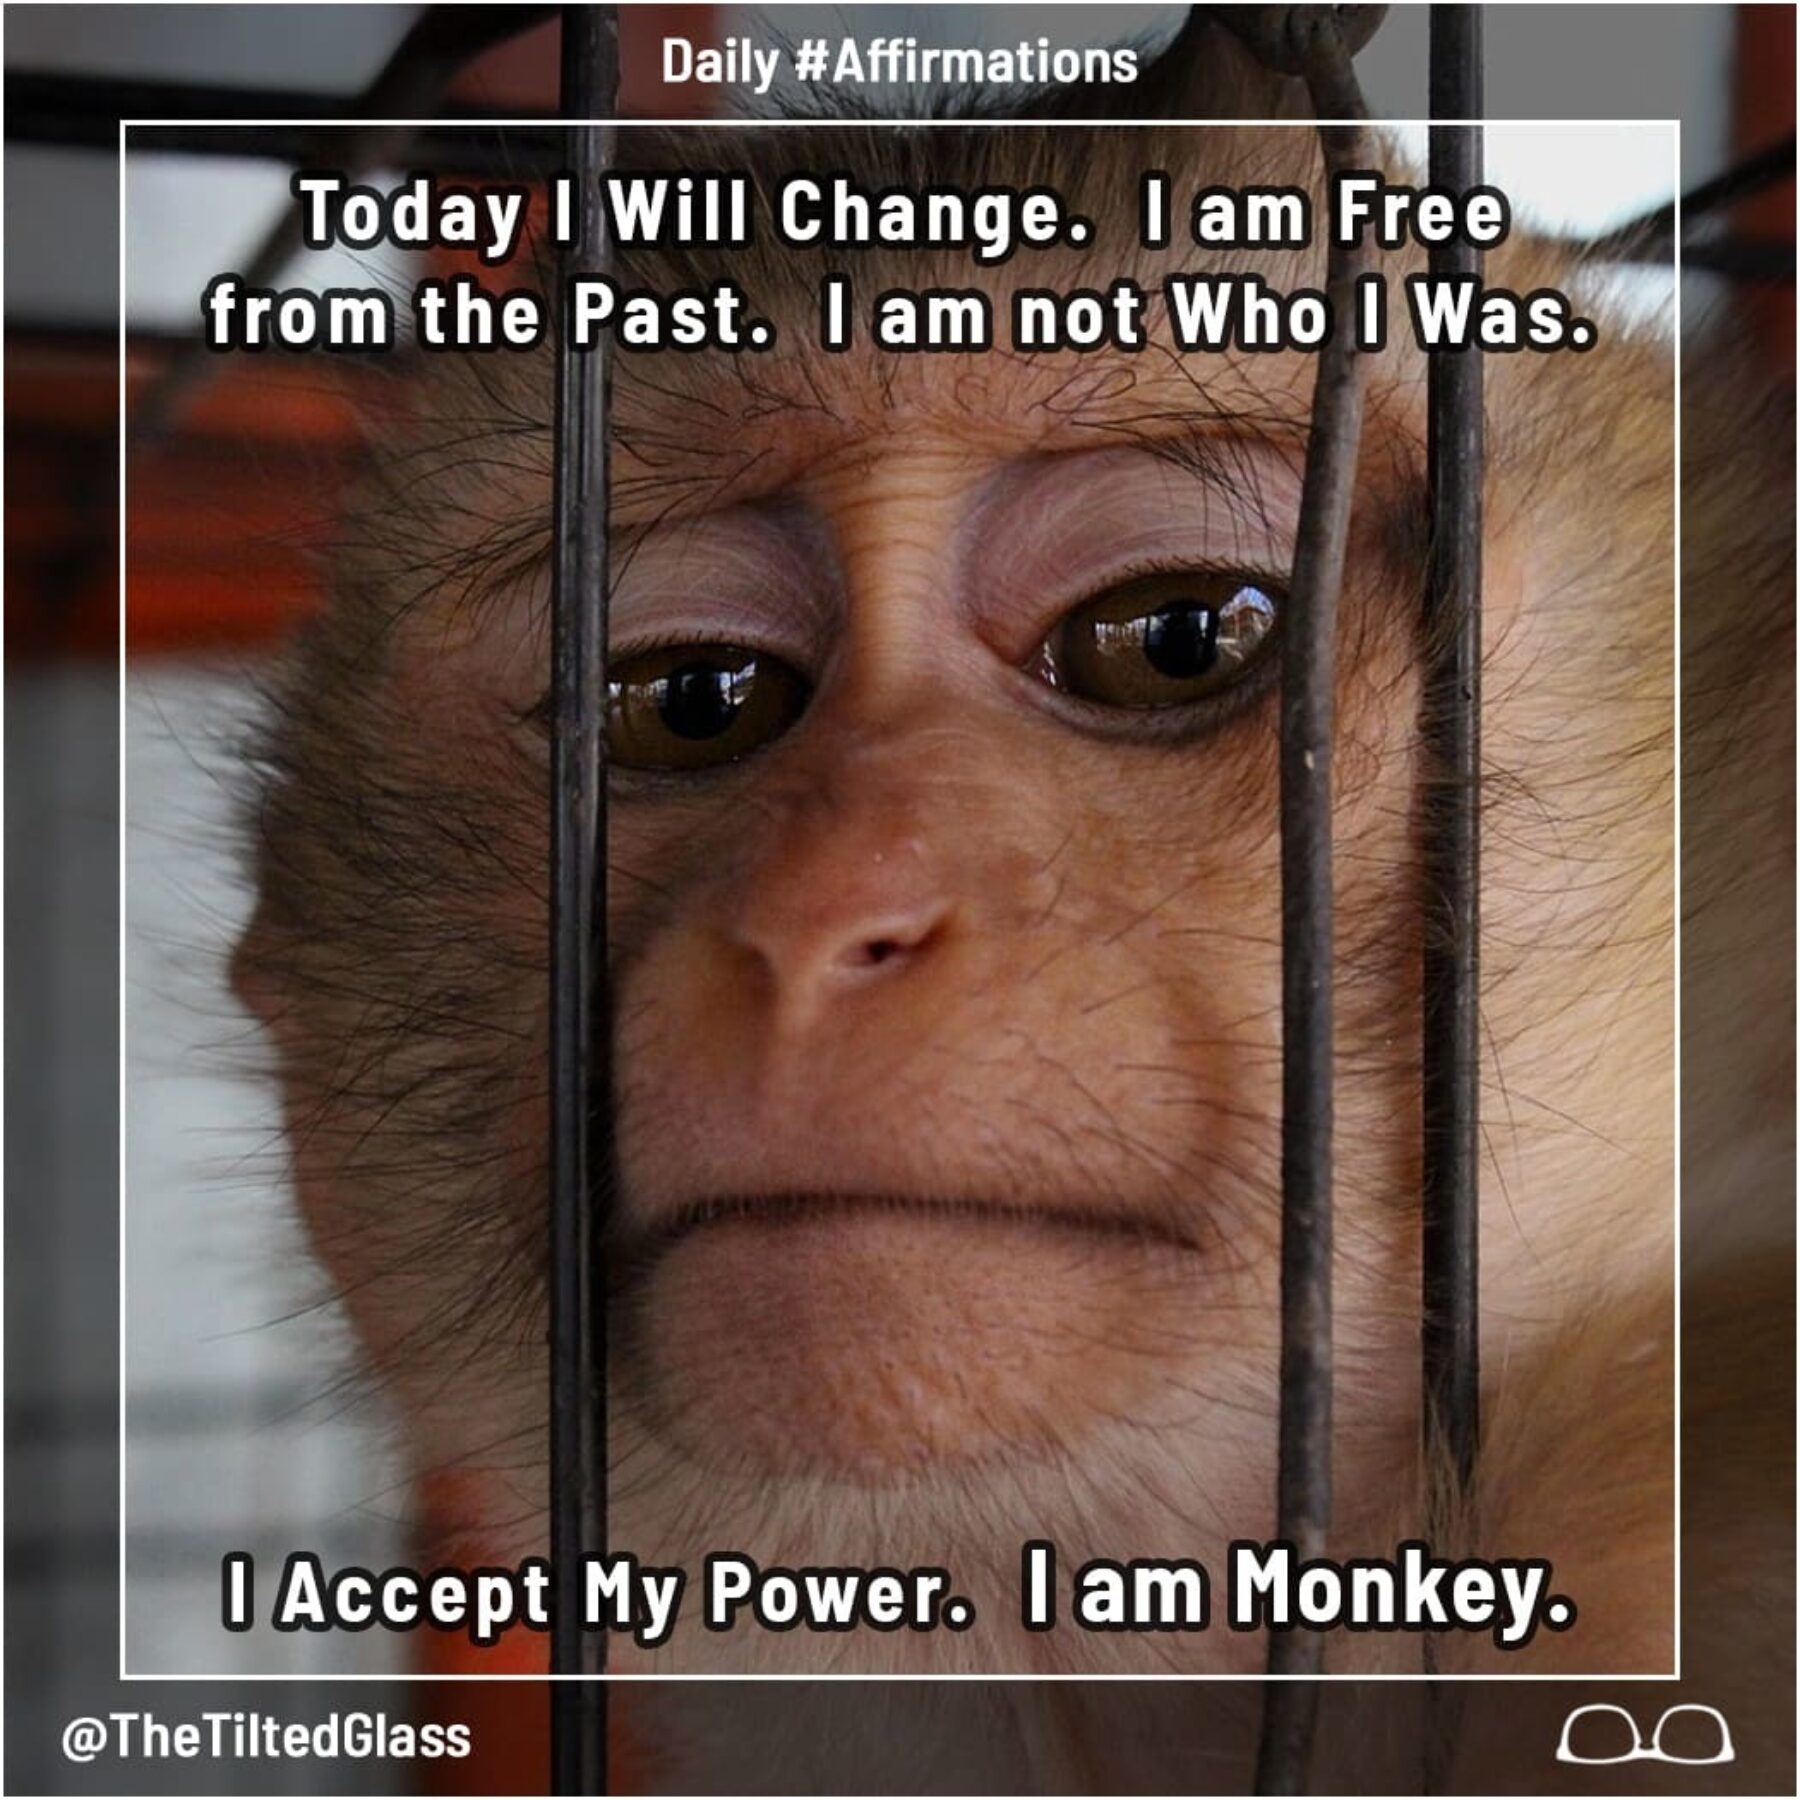 Today I Will Change.  I am Free from the Past.  I am not Who I Was.  I Accept My Power.  I am Monkey.